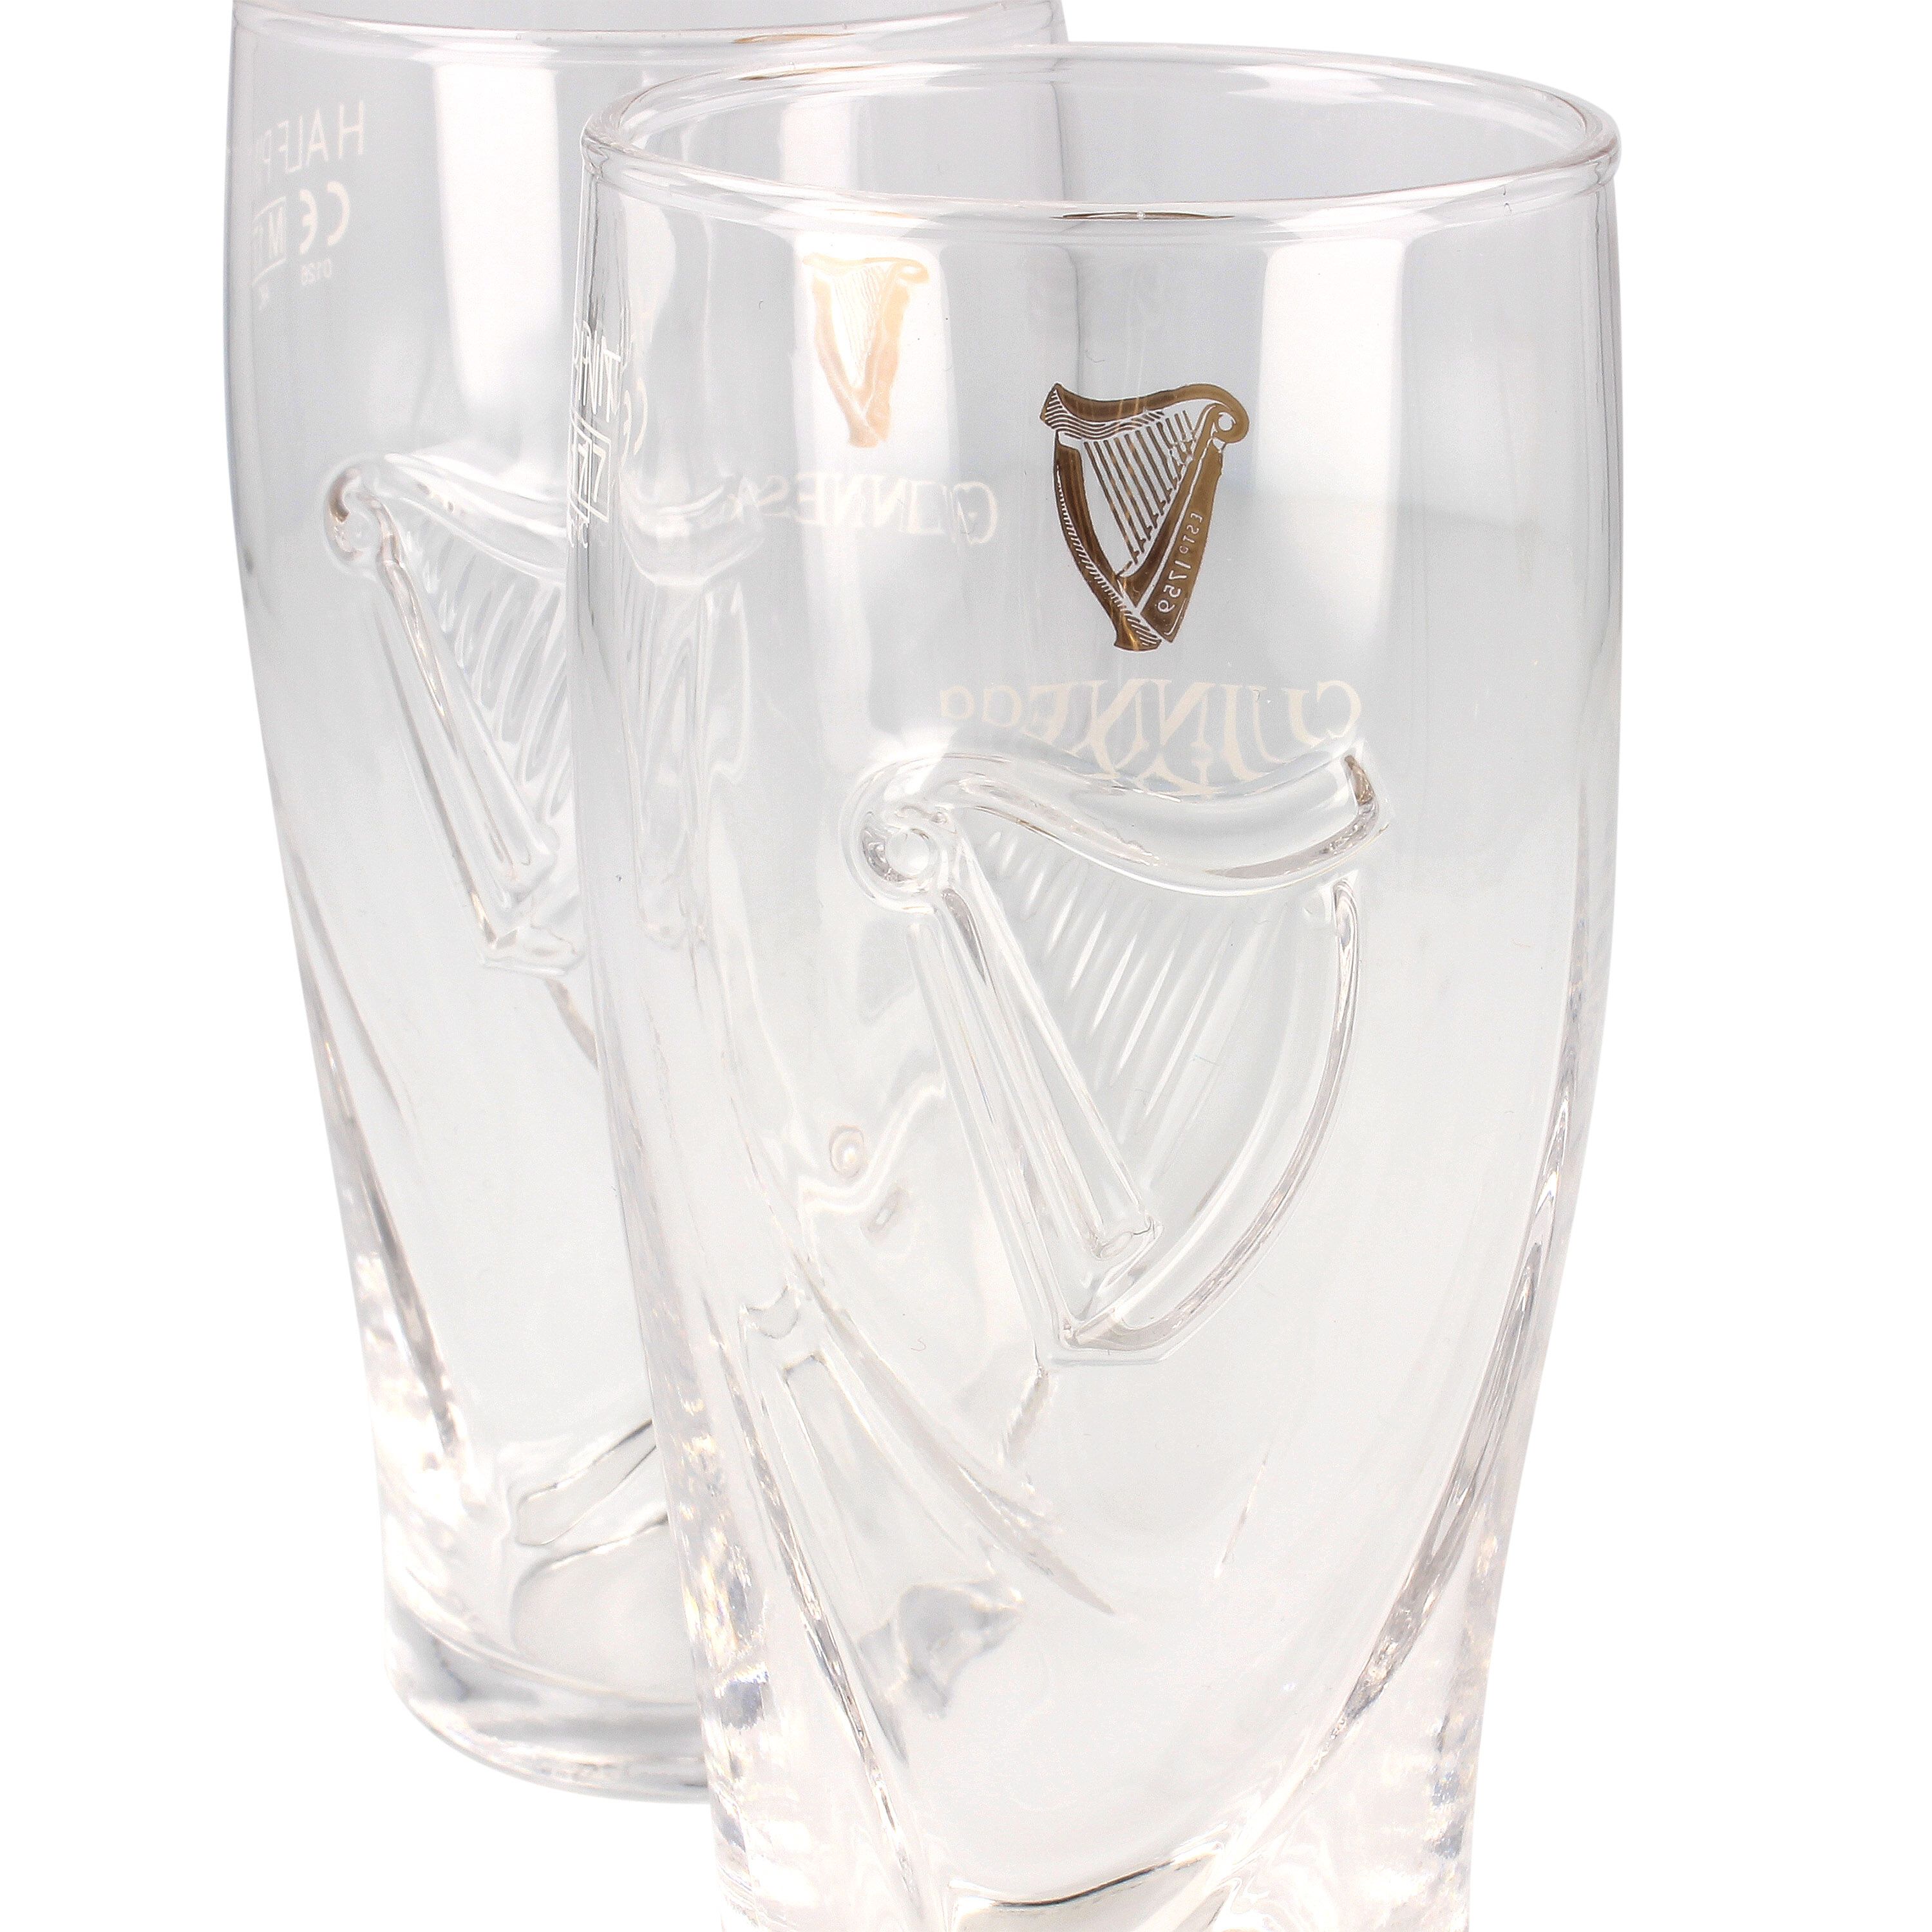 GUINESS BEER PINT GLASS DOUBLE LOGO AND HARP 